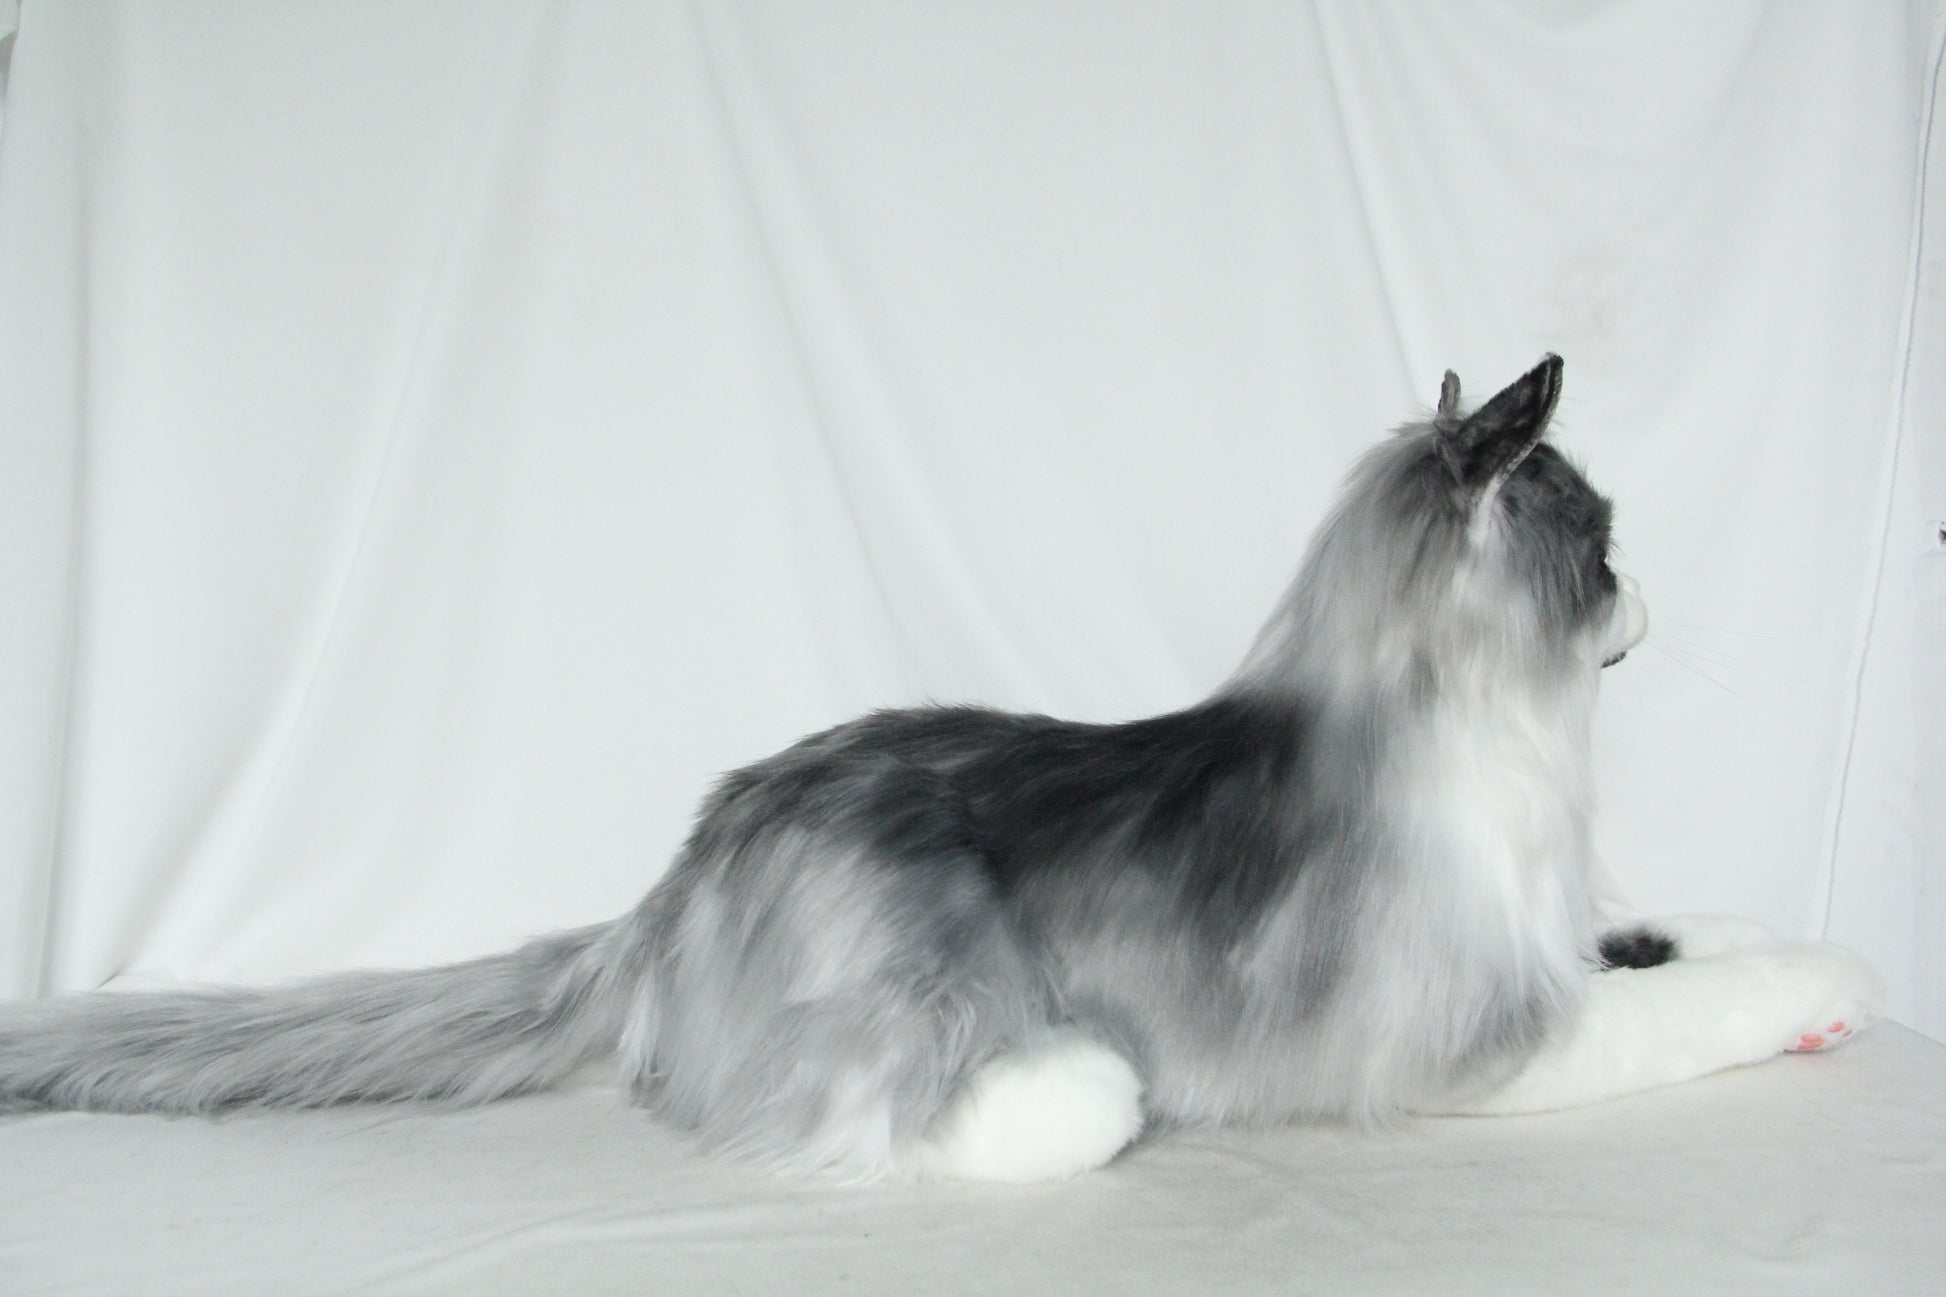 NO.37 55cm Long-haired gray cat in lying position - Chongker